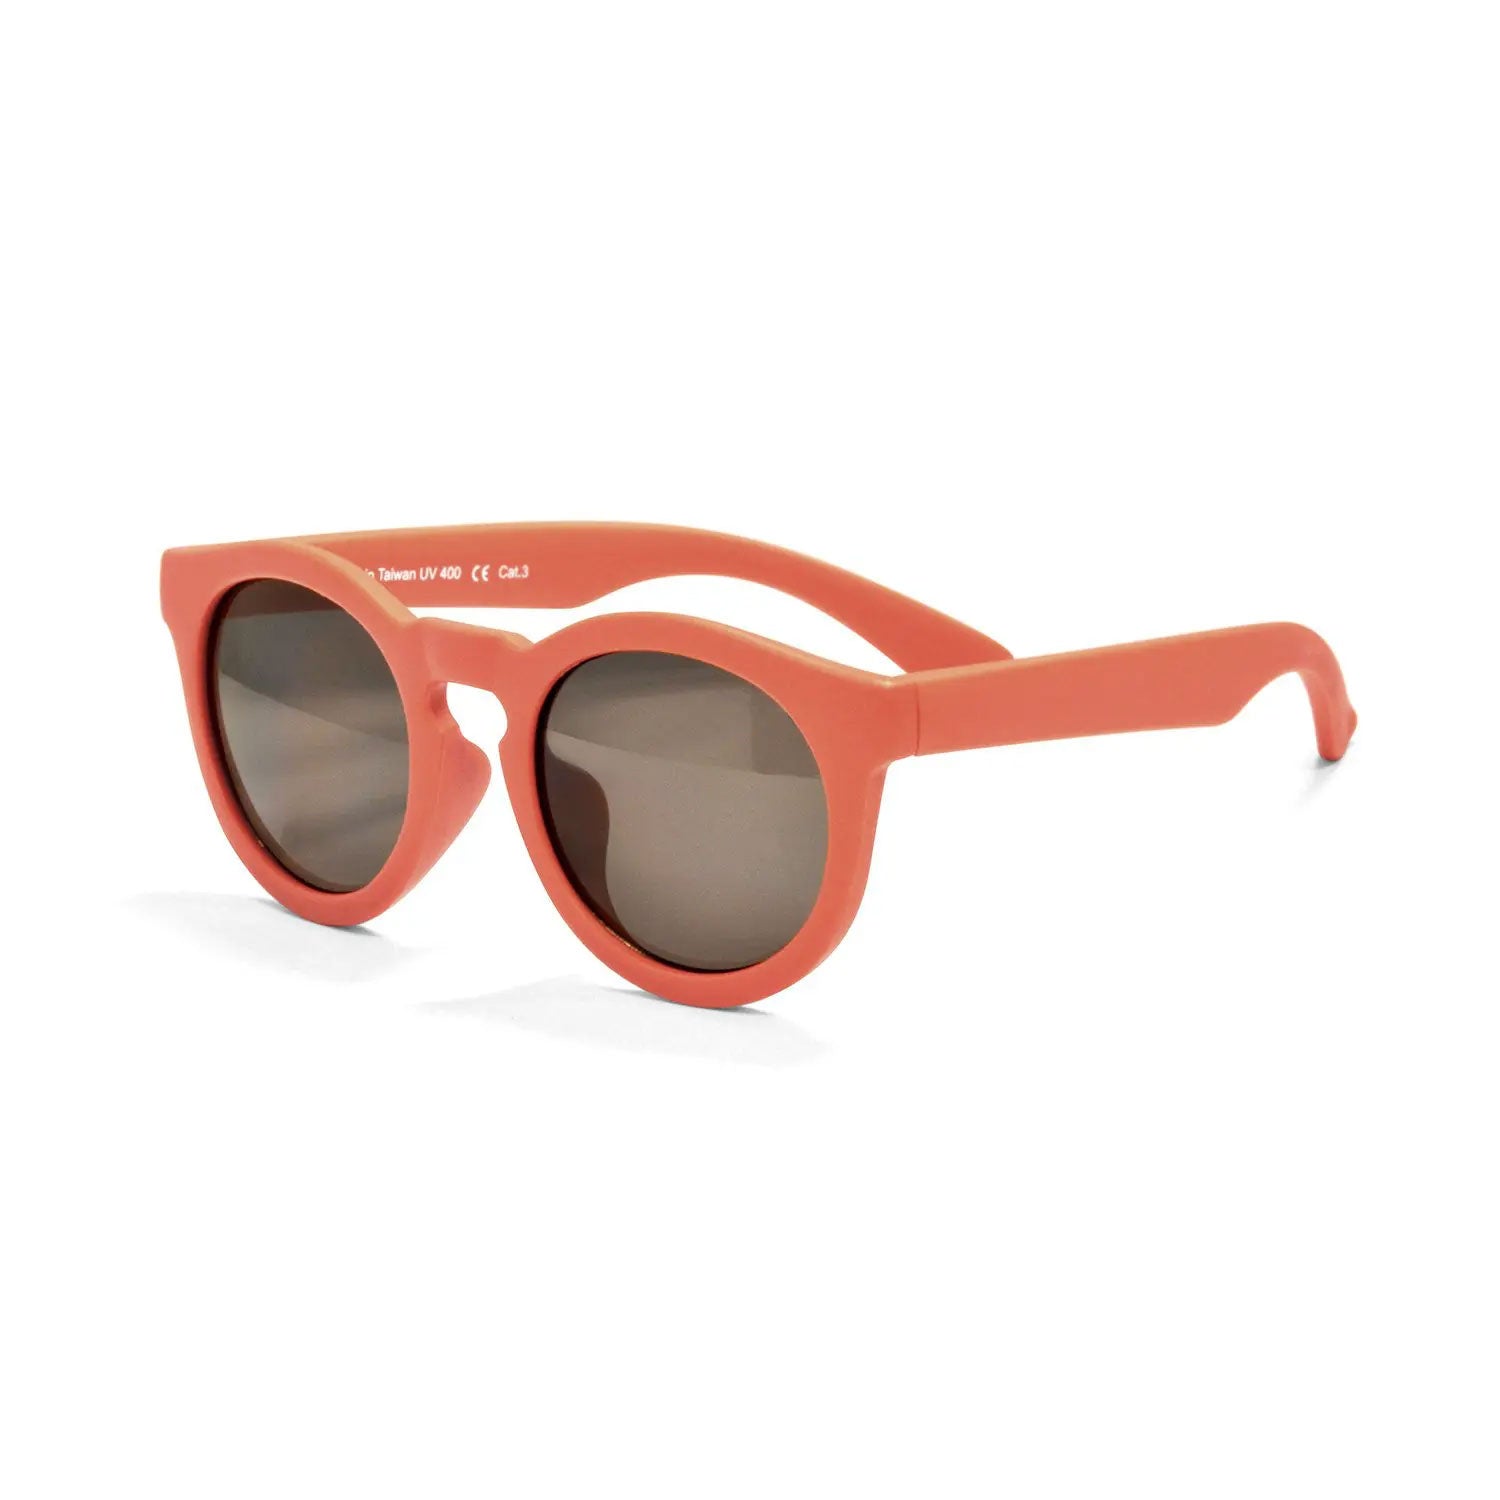 Real Shades Chill Sunglasses provide your child with 100% UVA/UVB protection at all times. They have a flexible frame and lightweight lenses, among other great features.